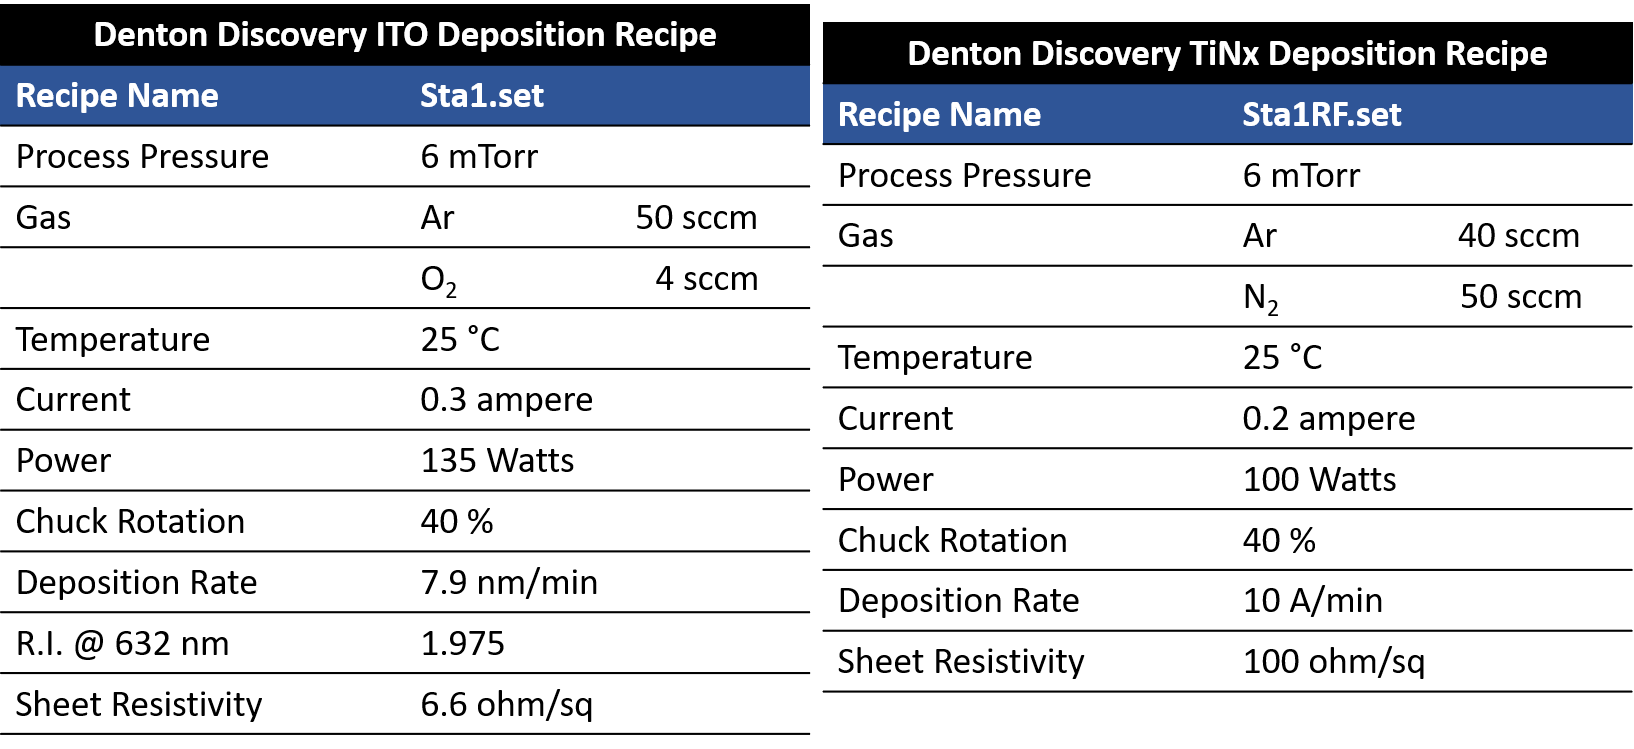 Denton Discovery Dielectric Deposition